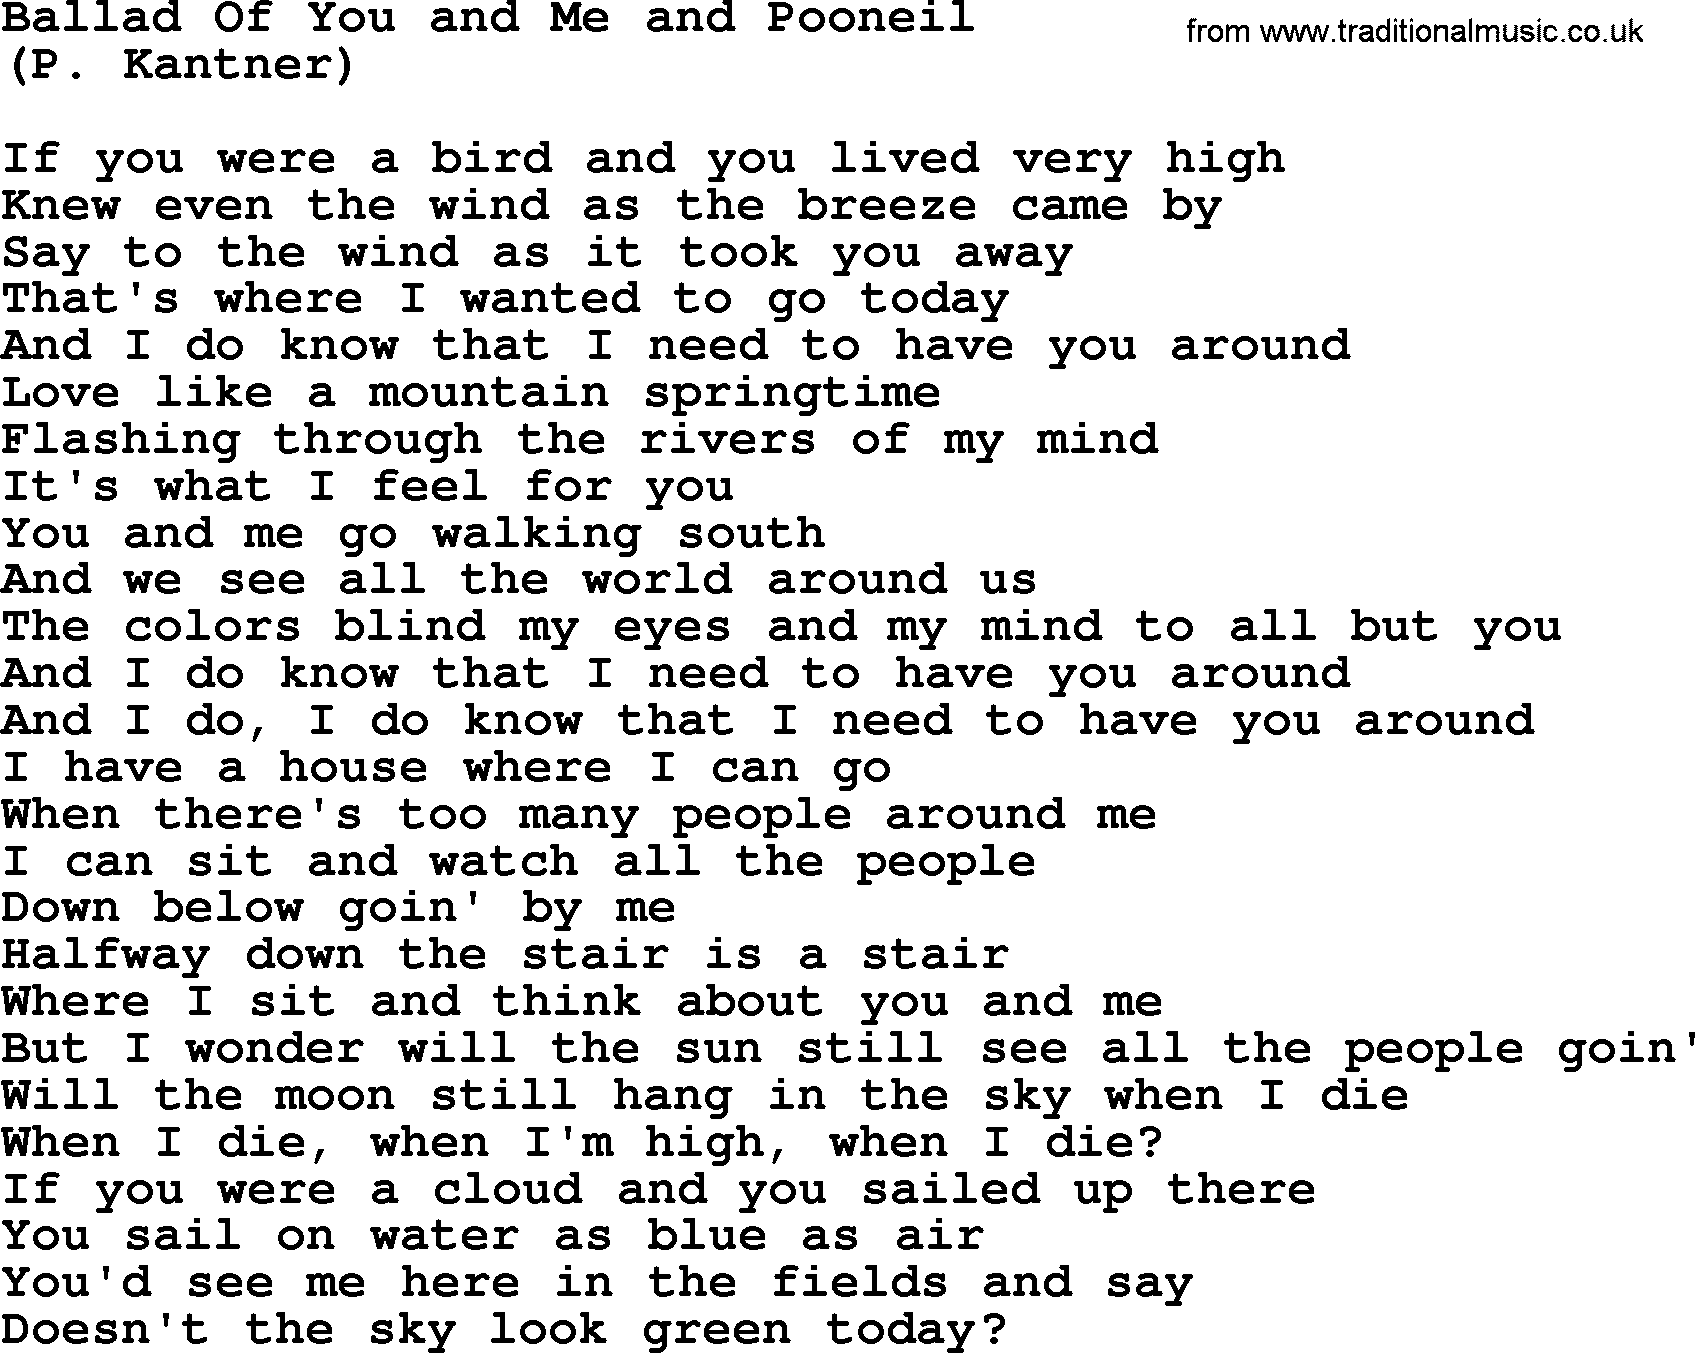 The Byrds song Ballad Of You And Me And Pooneil, lyrics